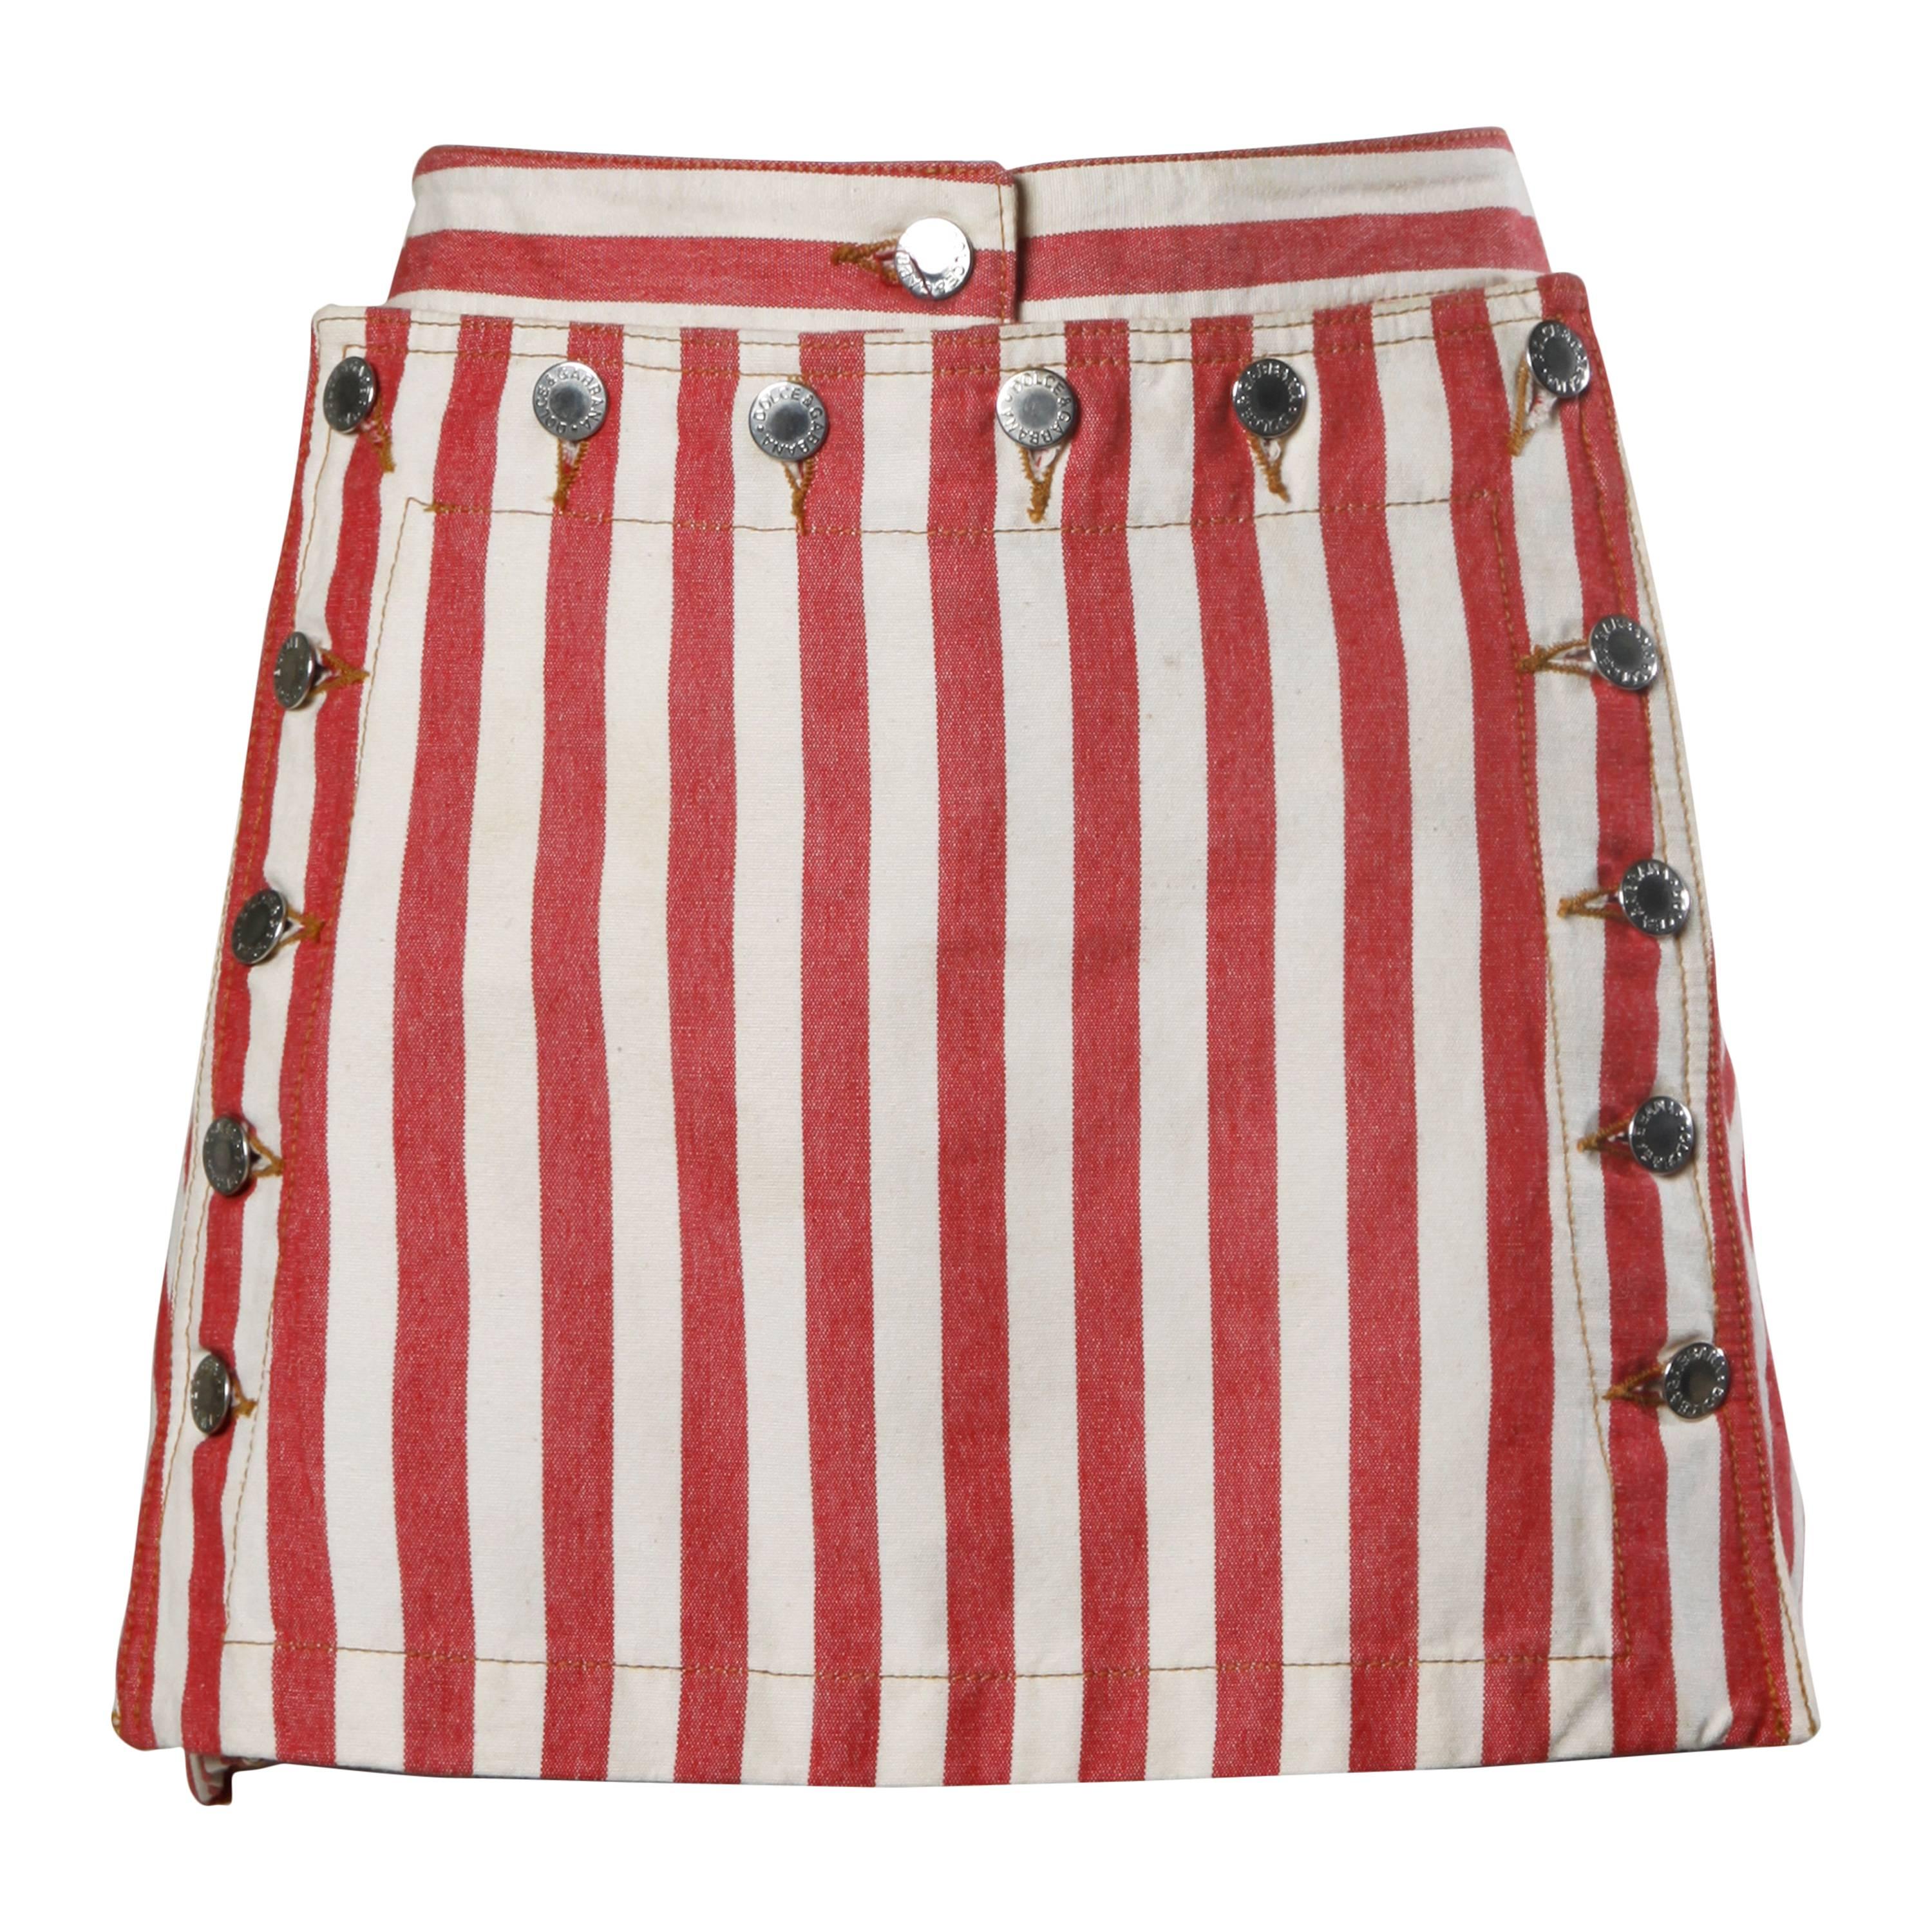 Dolce & Gabbana Red Striped Denim Mini Skirt with Lace Up Detail